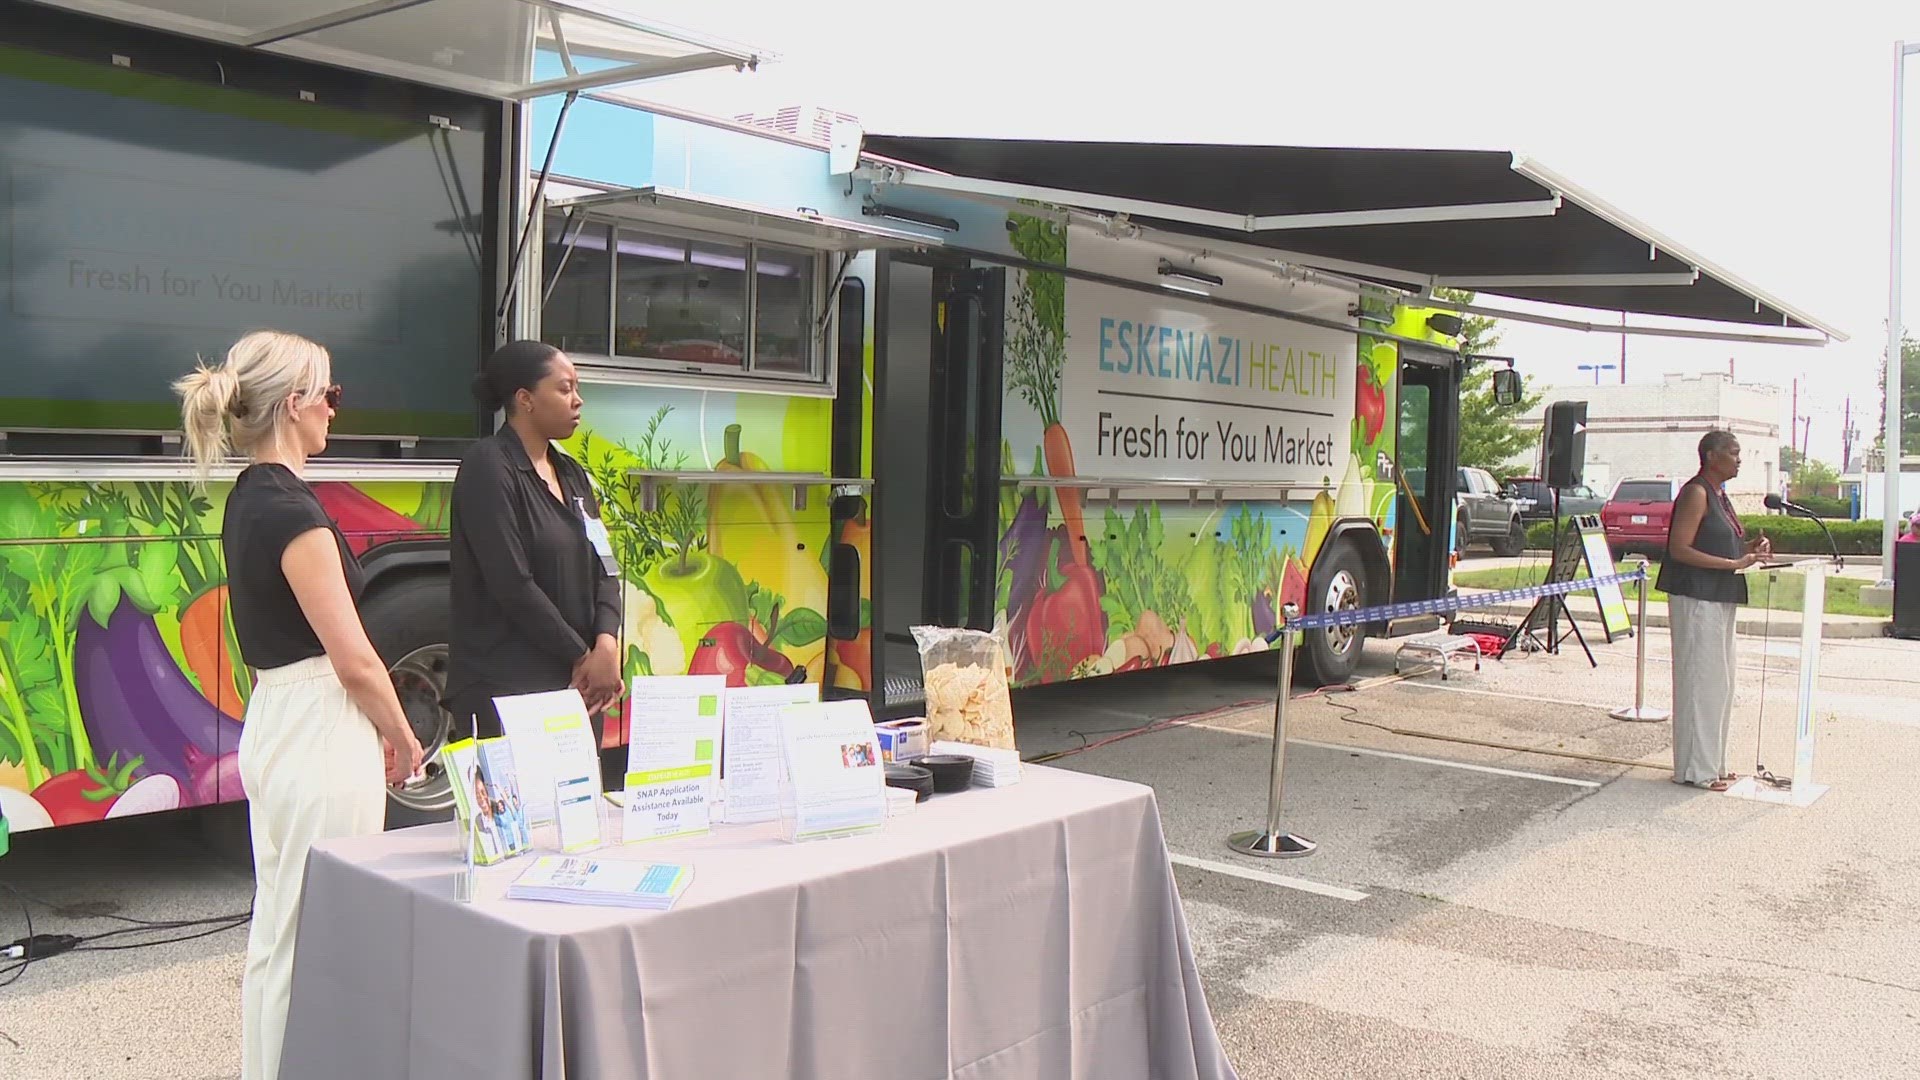 The hybrid mobile grocery store and food pantry is helping provide essential nutrients to Indianapolis.